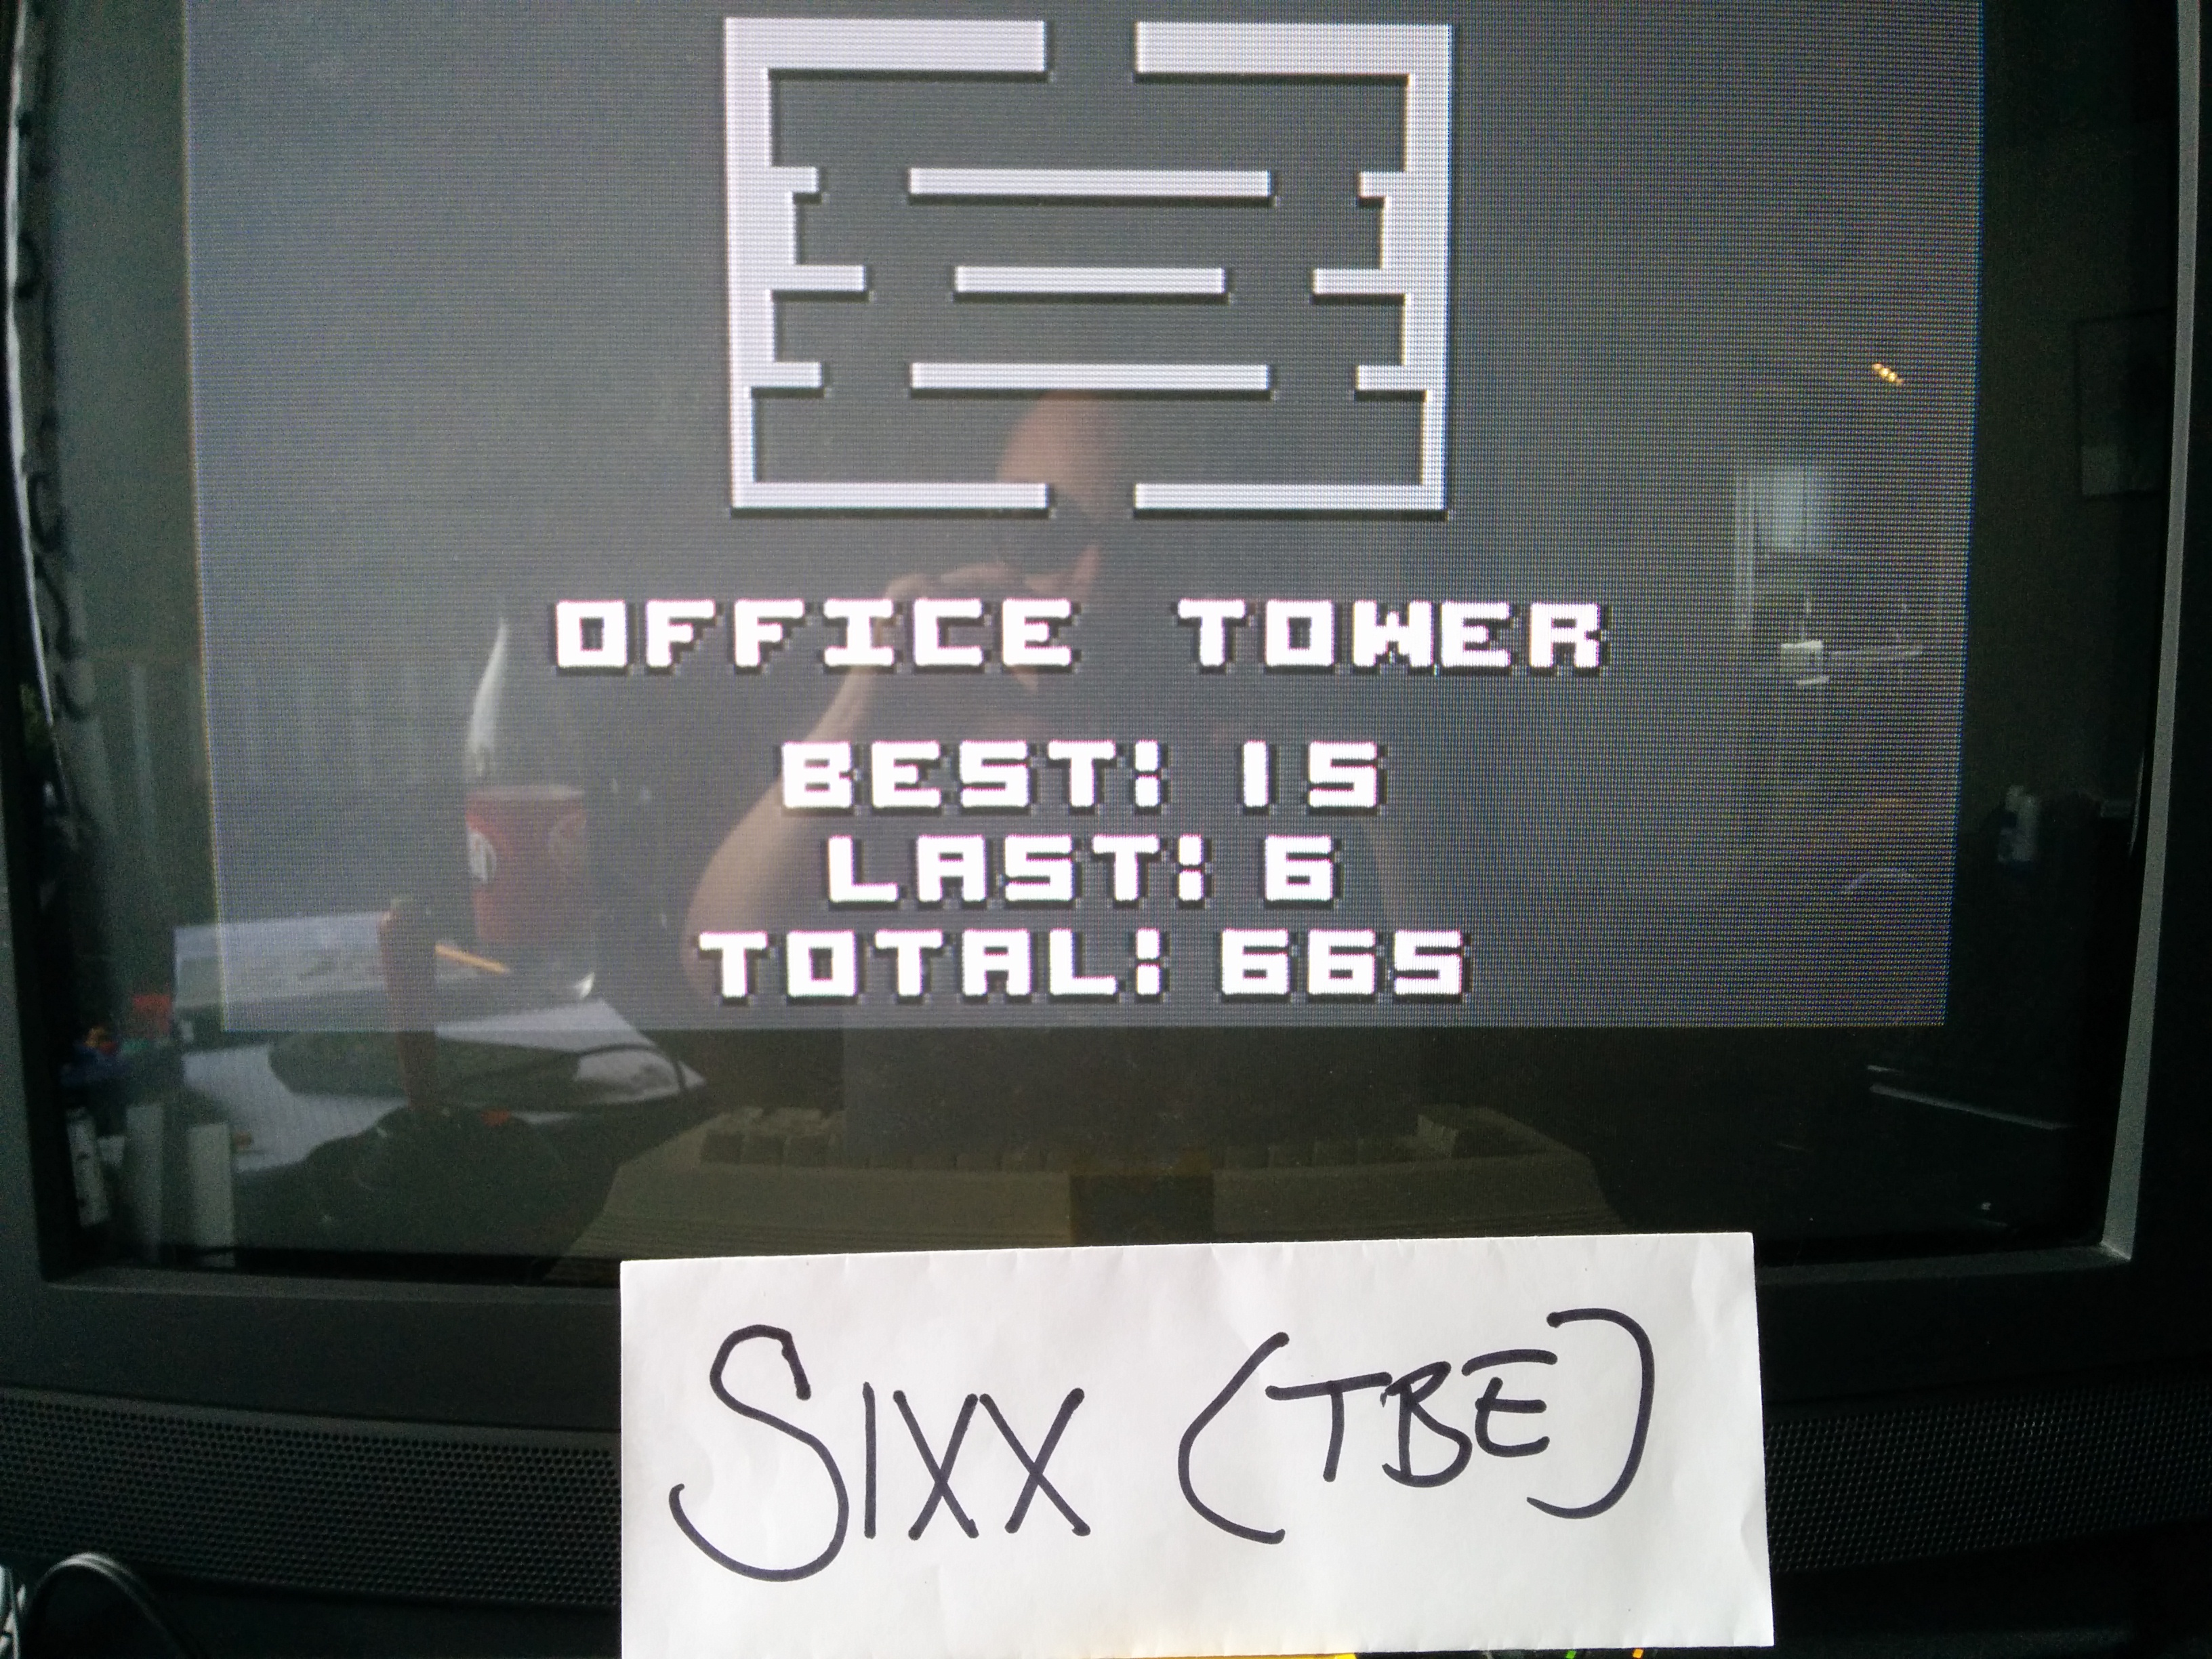 Sixx: Super Bread Box: Office Tower (Commodore 64) 15 points on 2014-04-30 03:07:11